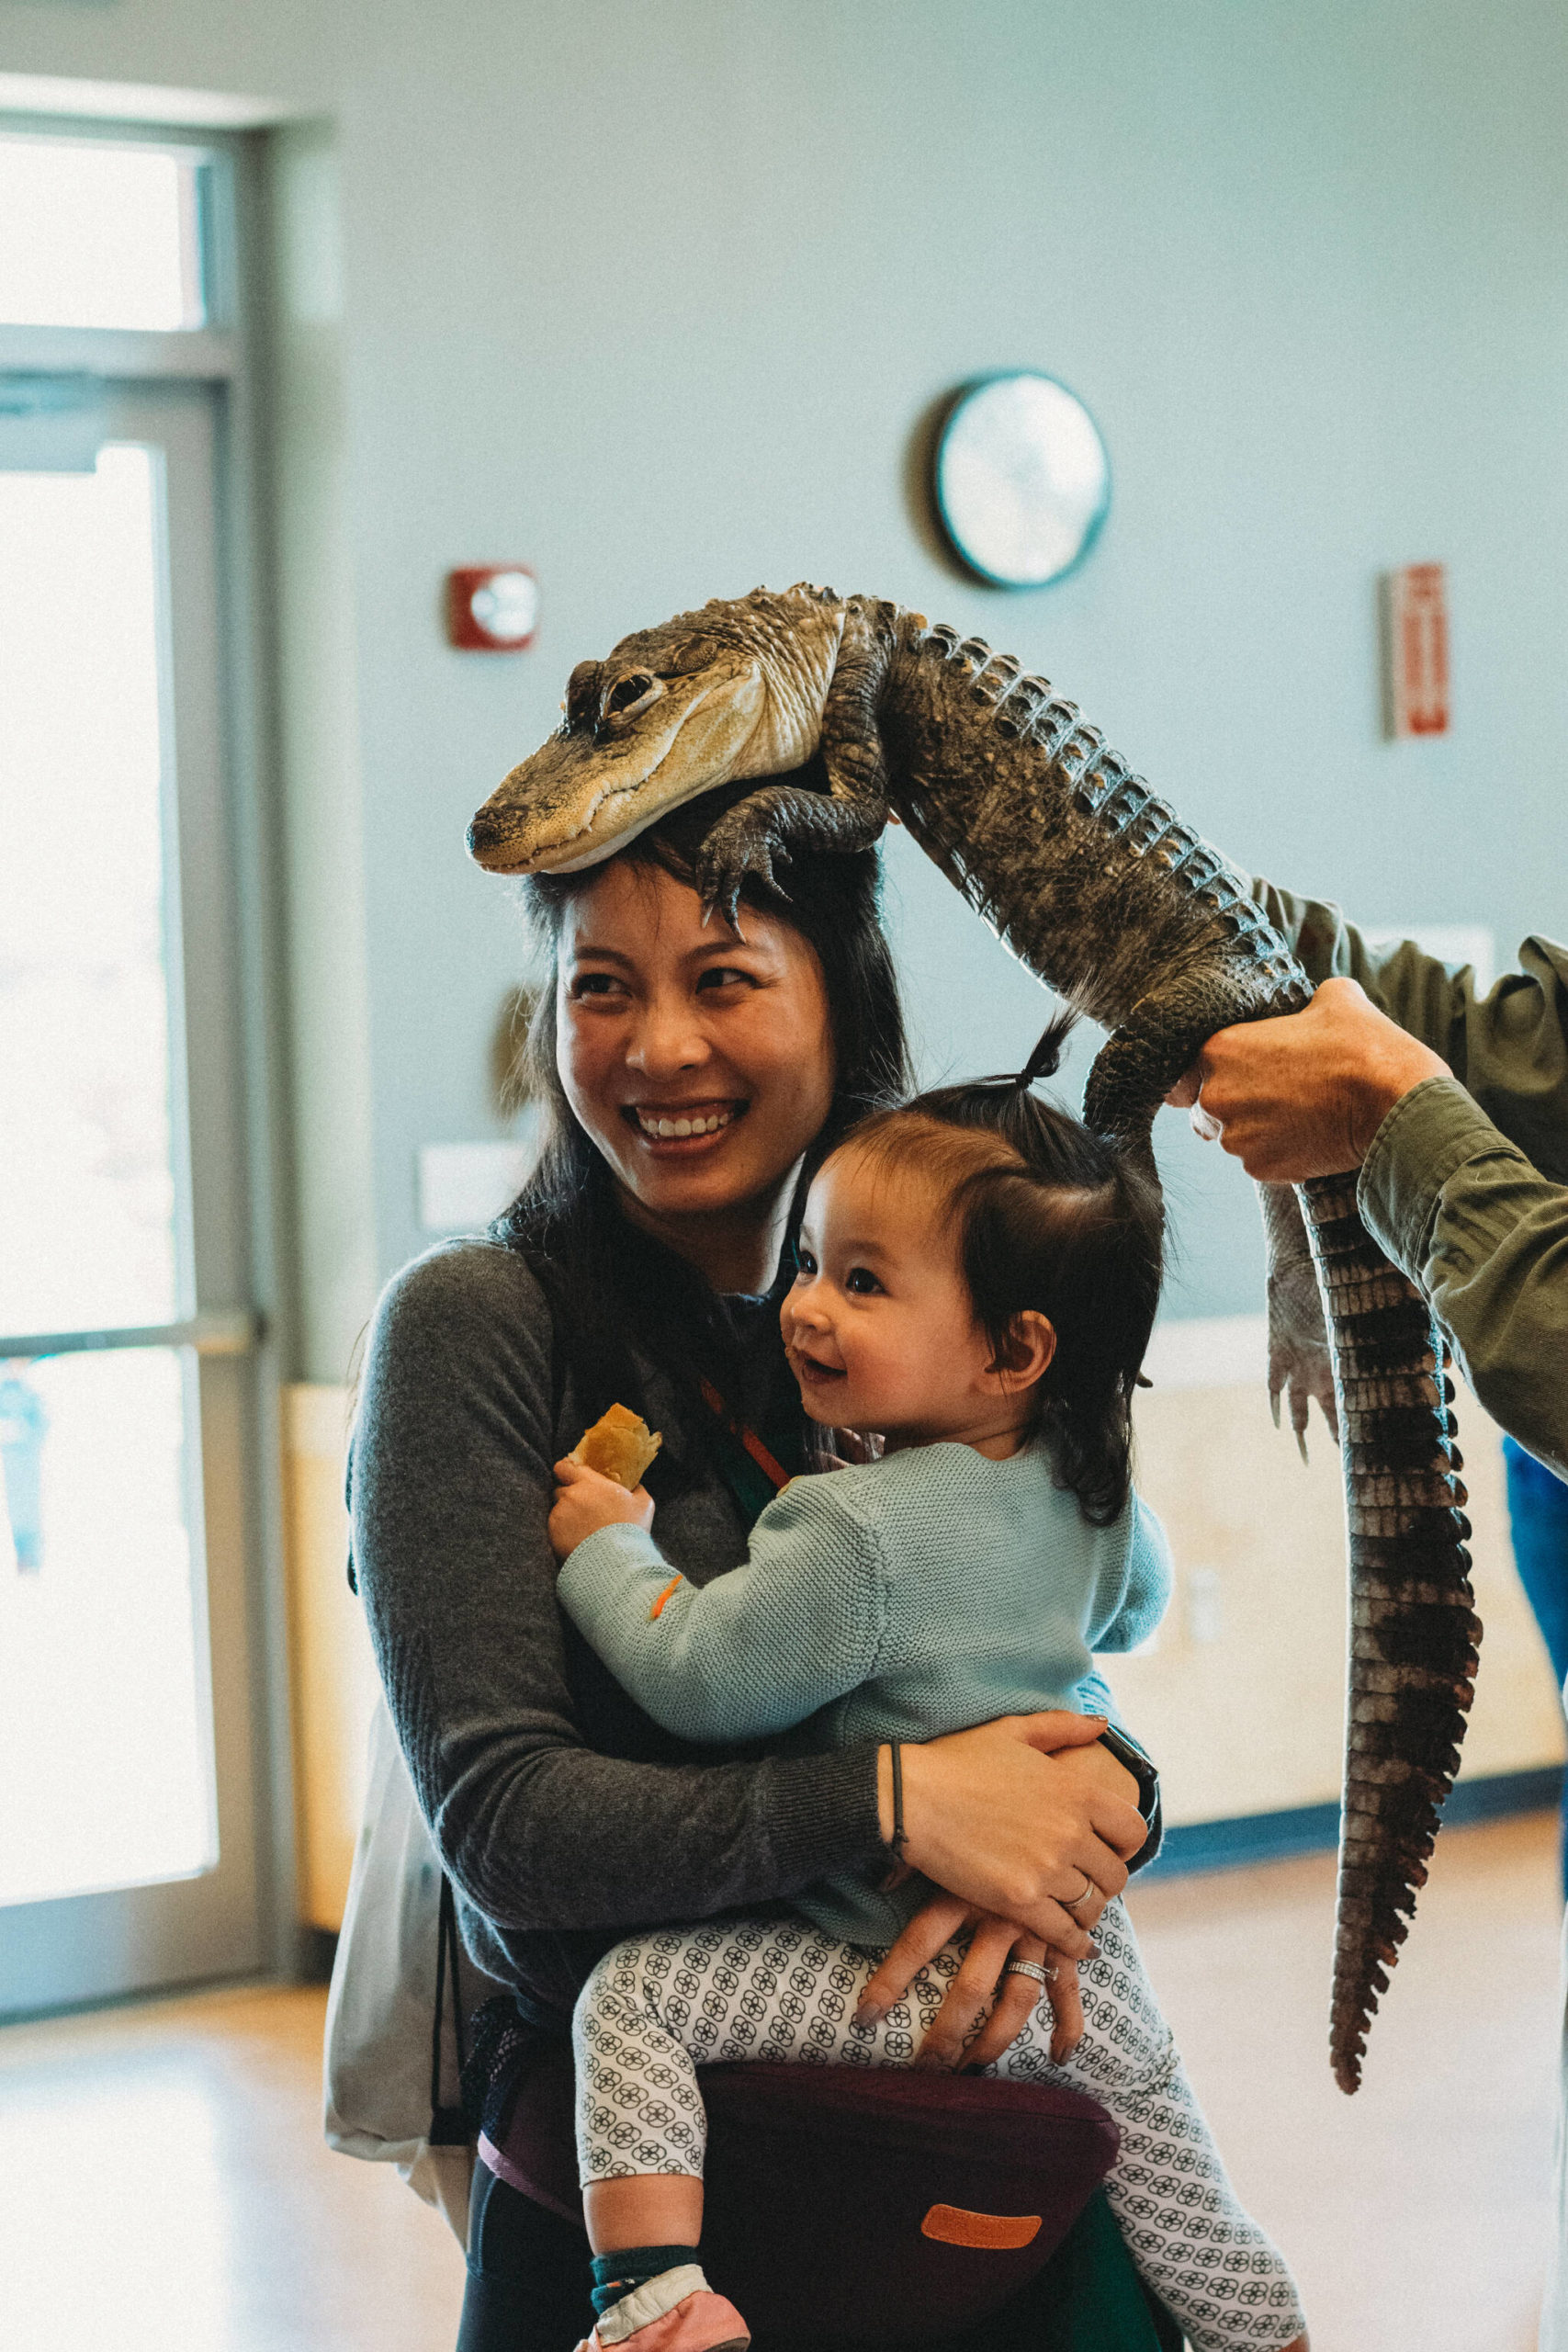 Fan Yaun and her daughter Rya, 1, visit with an alligator that The Reptile Man brought to last Saturday’s Circus event at the Mercer Island Community and Event Center. The Mercer Island Preschool Association and the city presented the all-ages event, which also featured a police boat, carnival games, a petting zoo, face painting and more. Courtesy of B3 photography